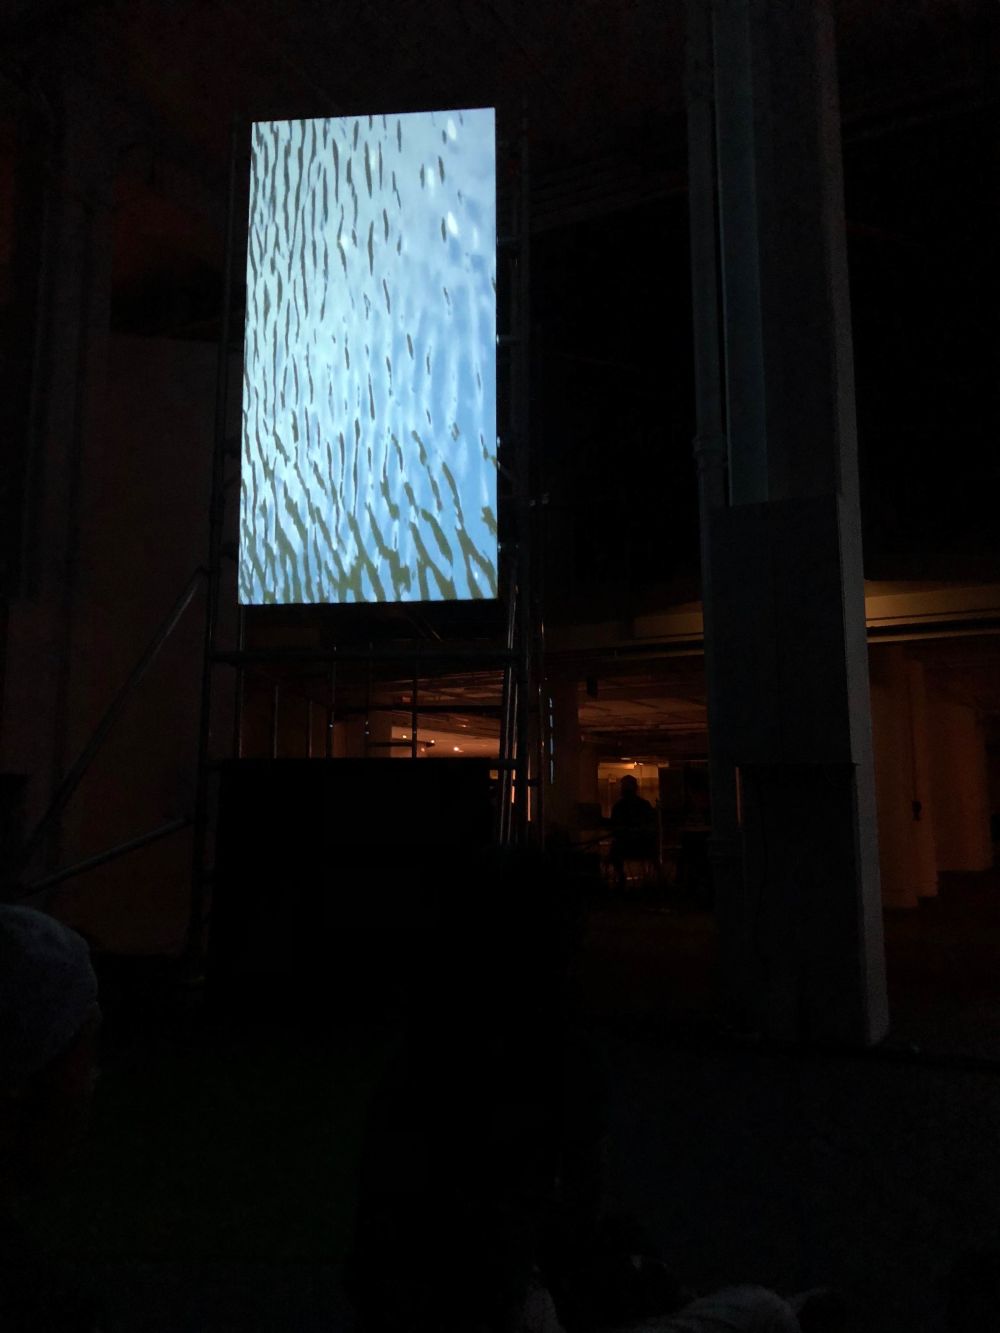 installation at 3 night long event at the Barbican